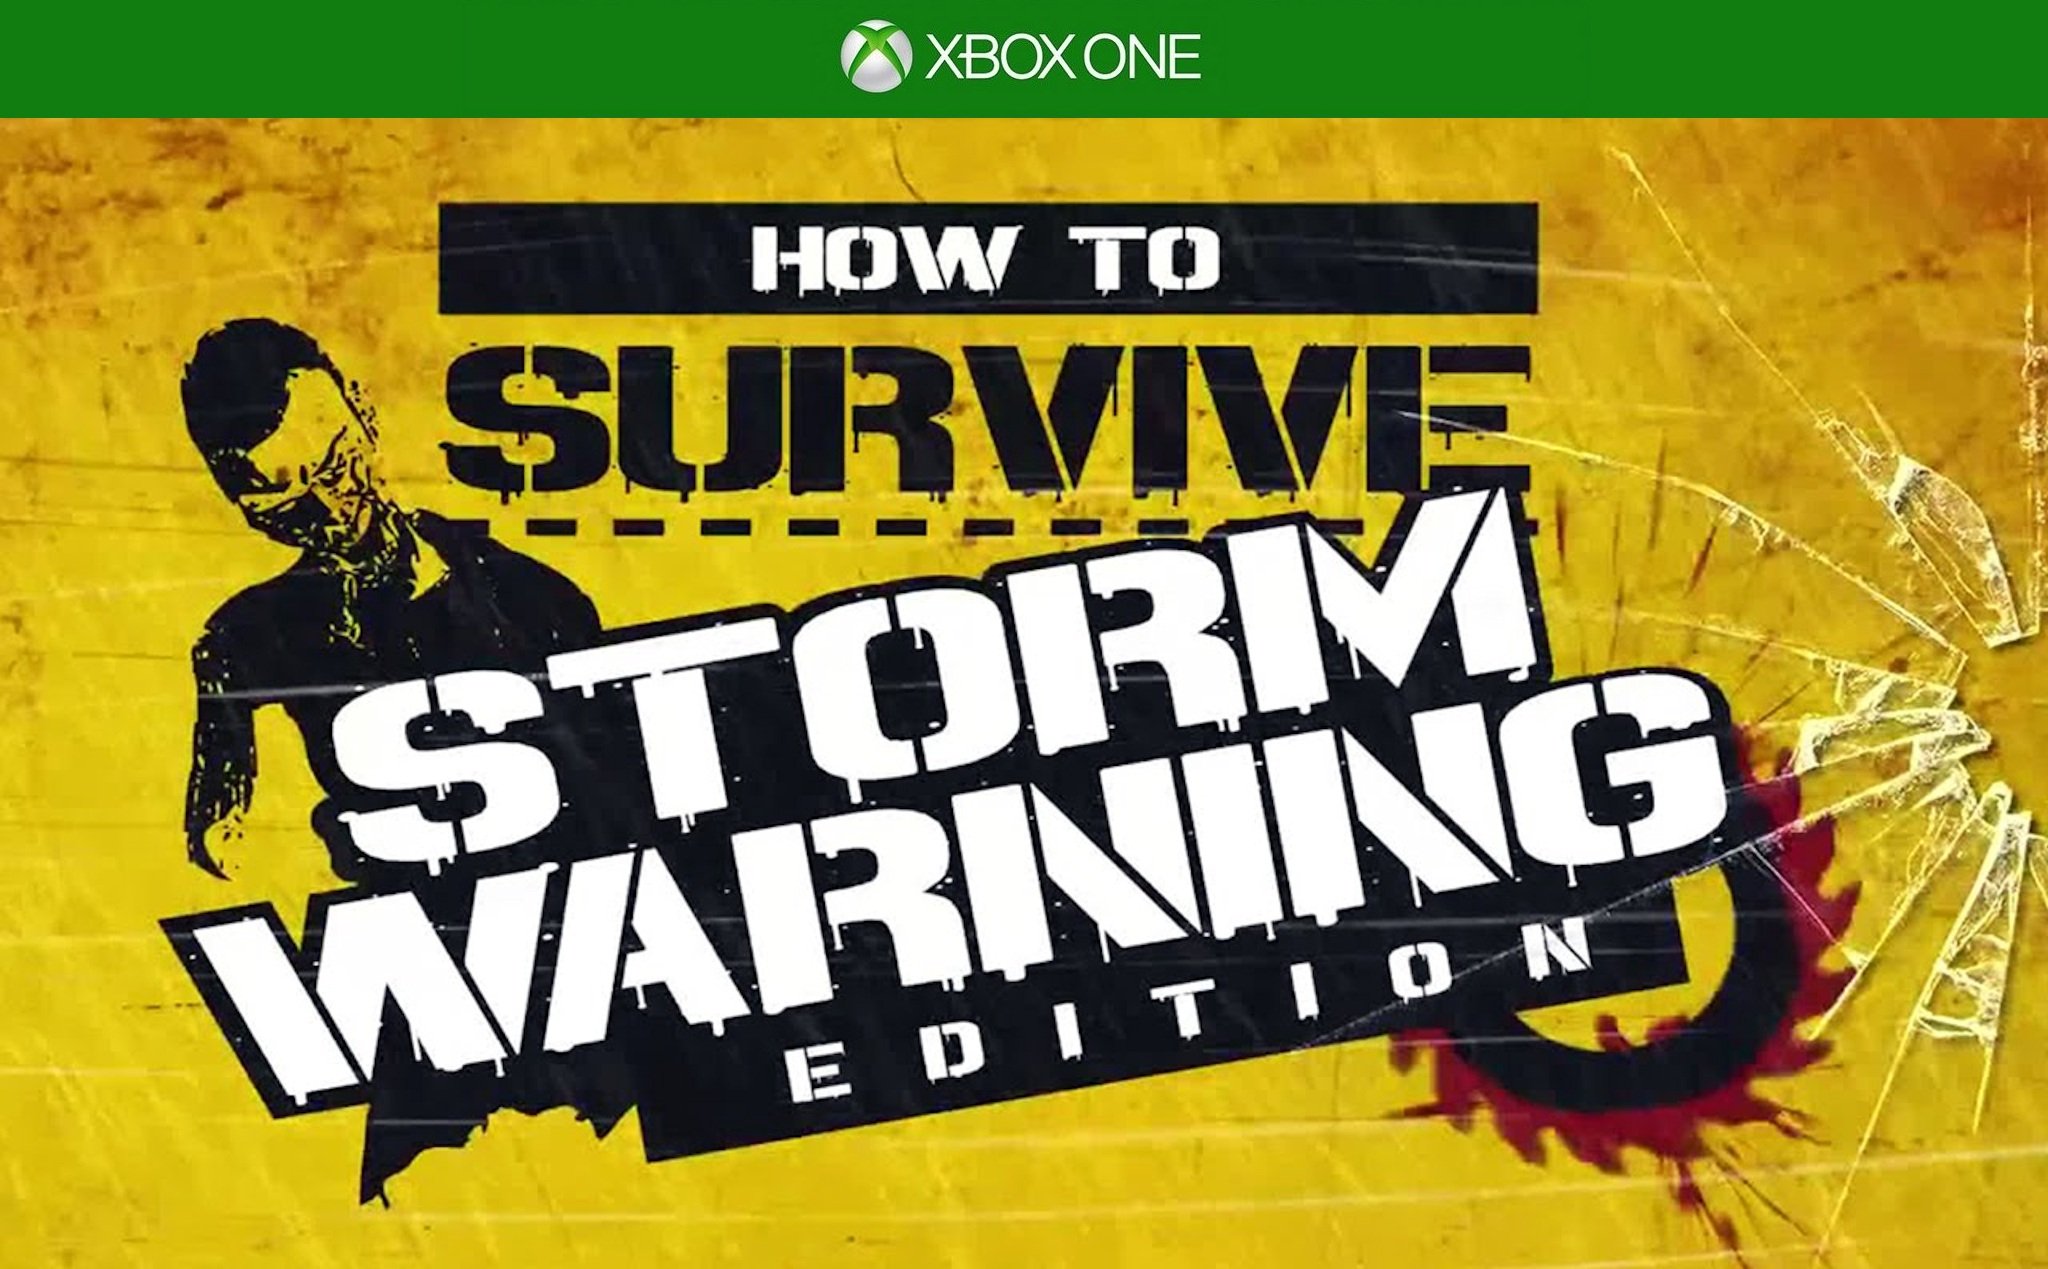 How_to_Survive_Storm_Warning_Edition_logo_main.jpg